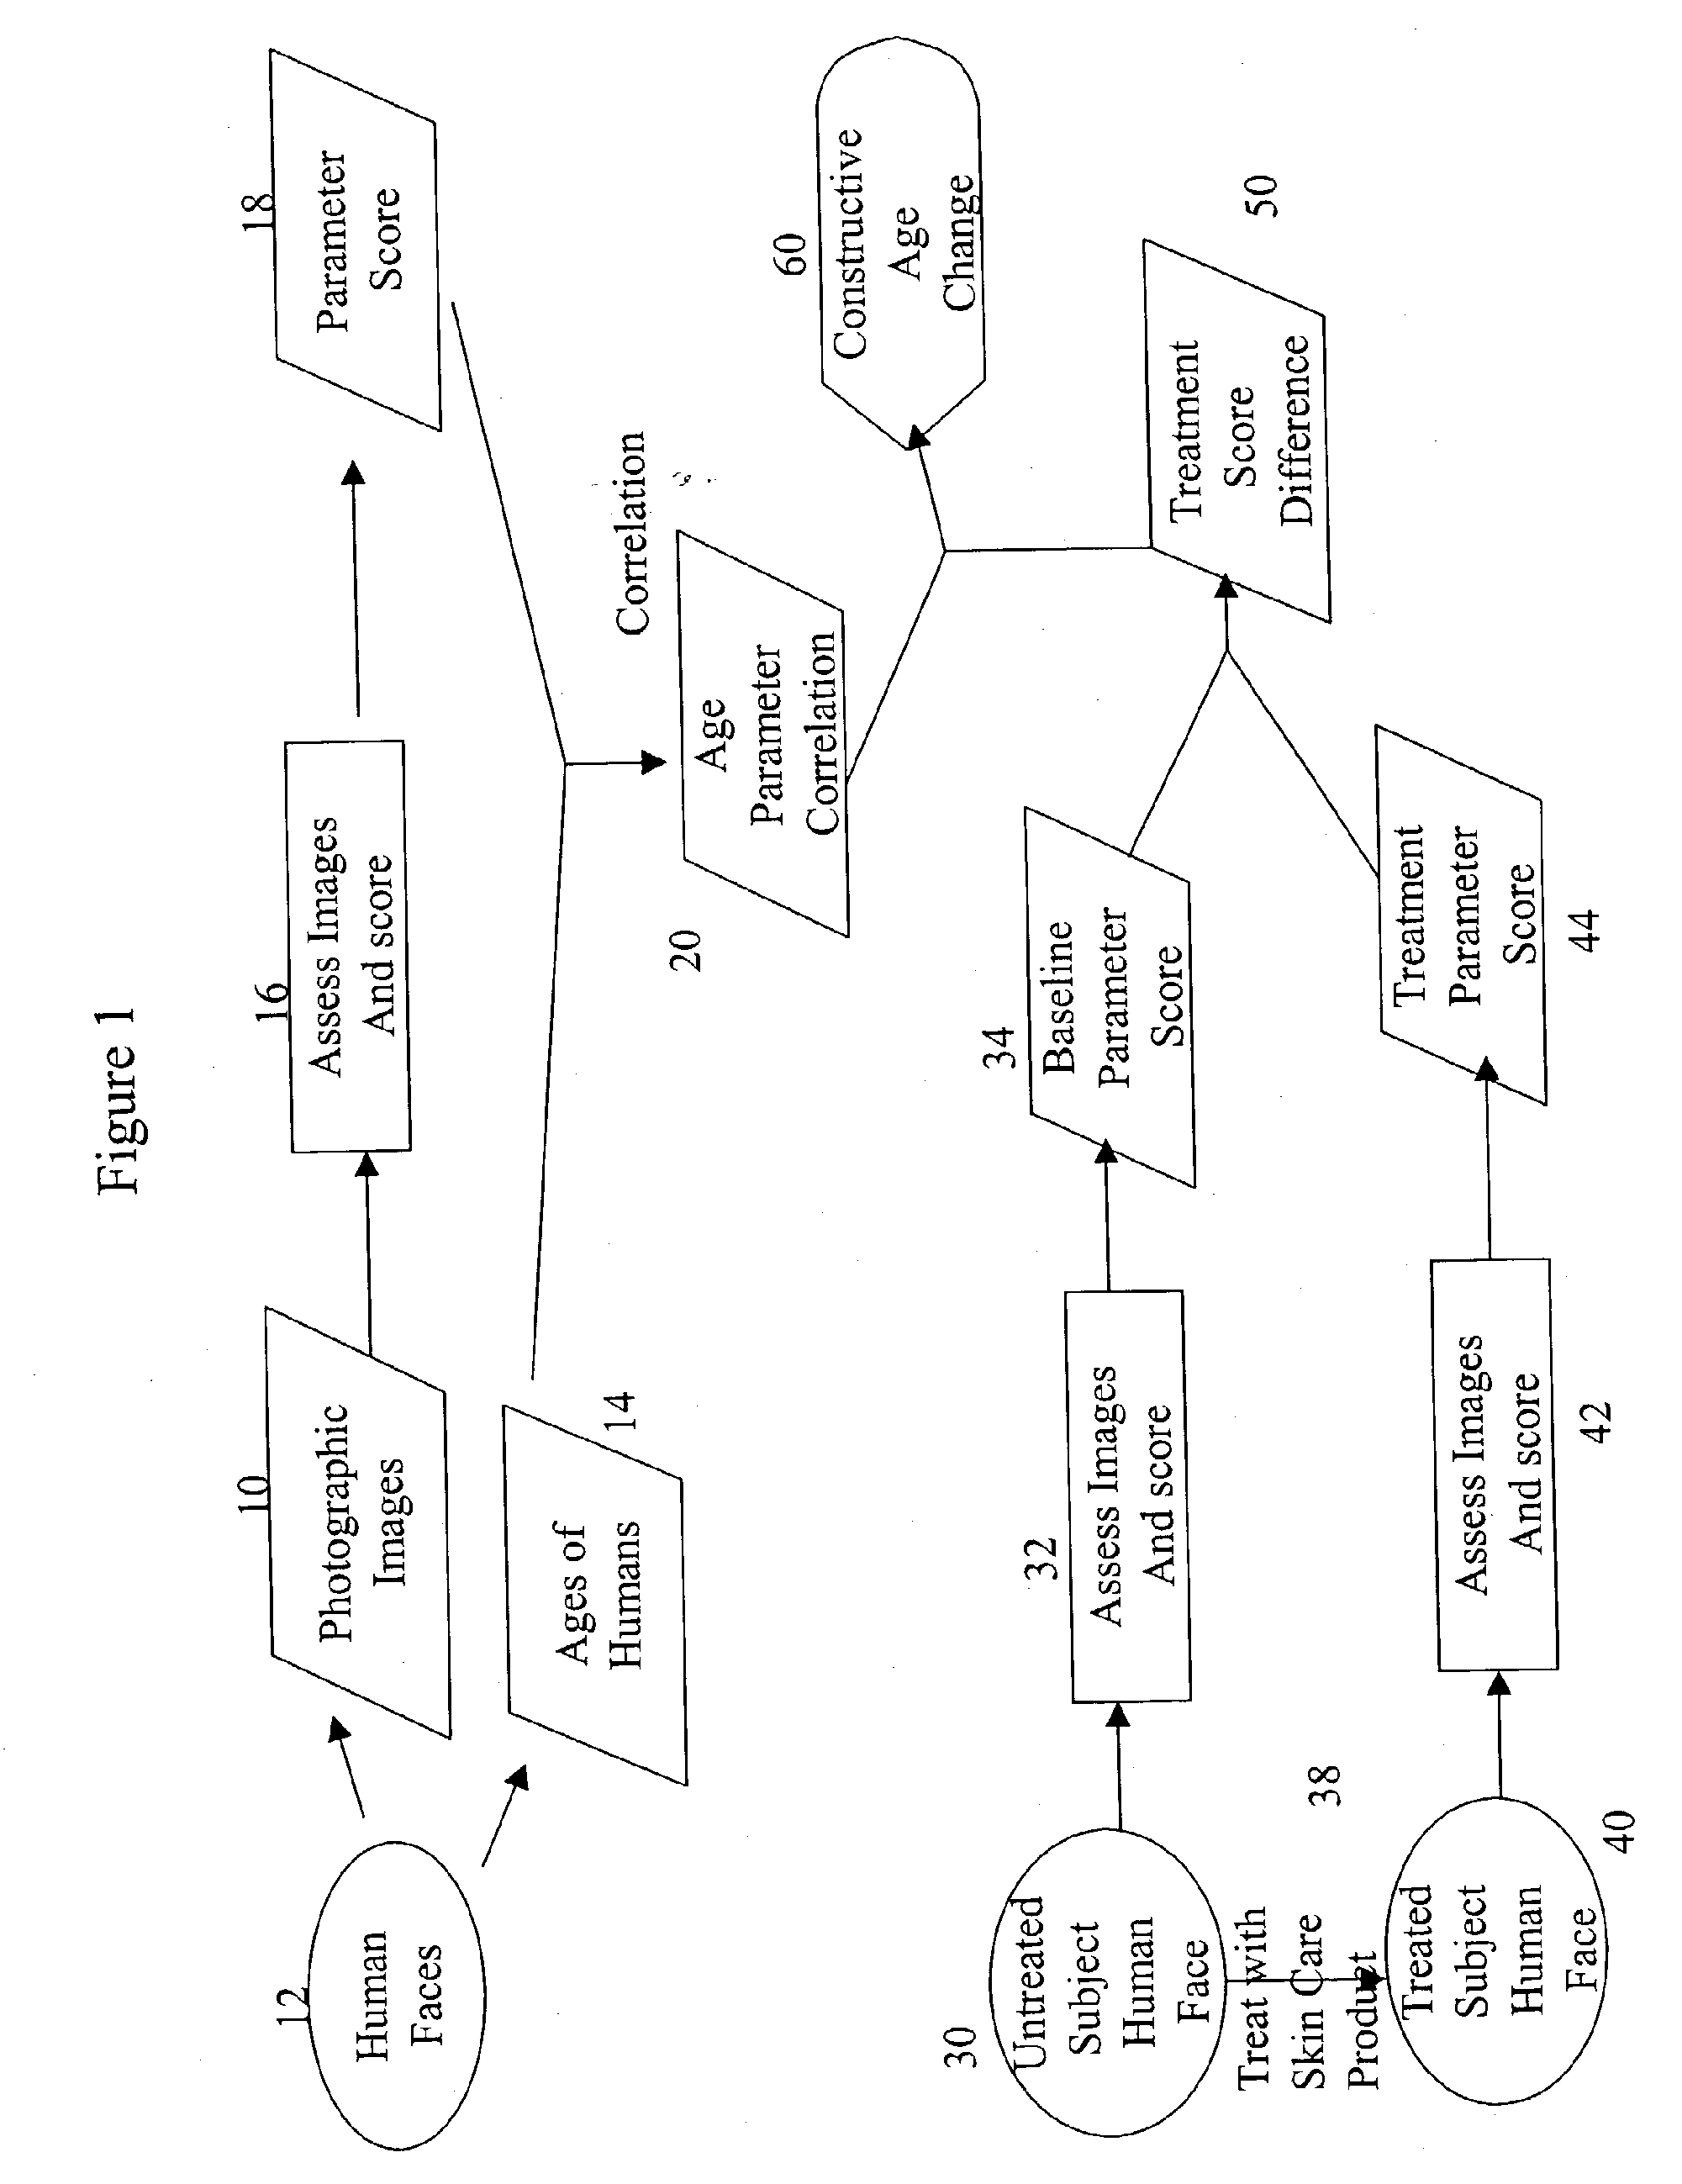 Method of Measuring the Efficacy of a Skin Treatment Program